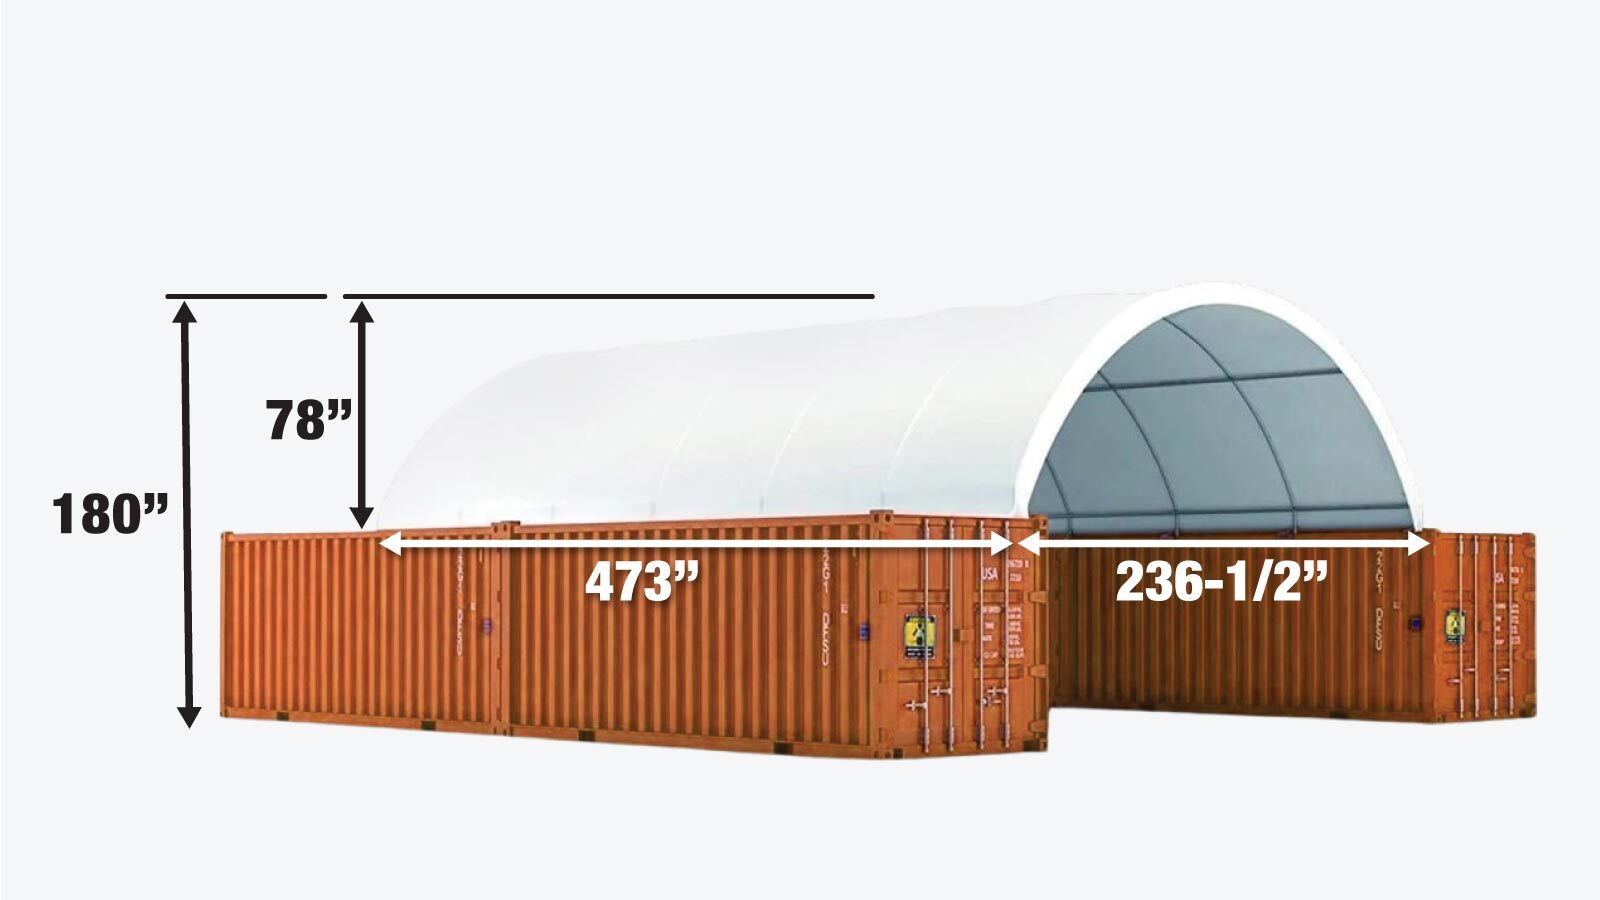 TMG Industrial 20' x 40' PVC Fabric Container Shelter, Fire Retardant, Water Resistant, UV Protected, TMG-ST2041CV(Previously ST2040C)-specifications-image